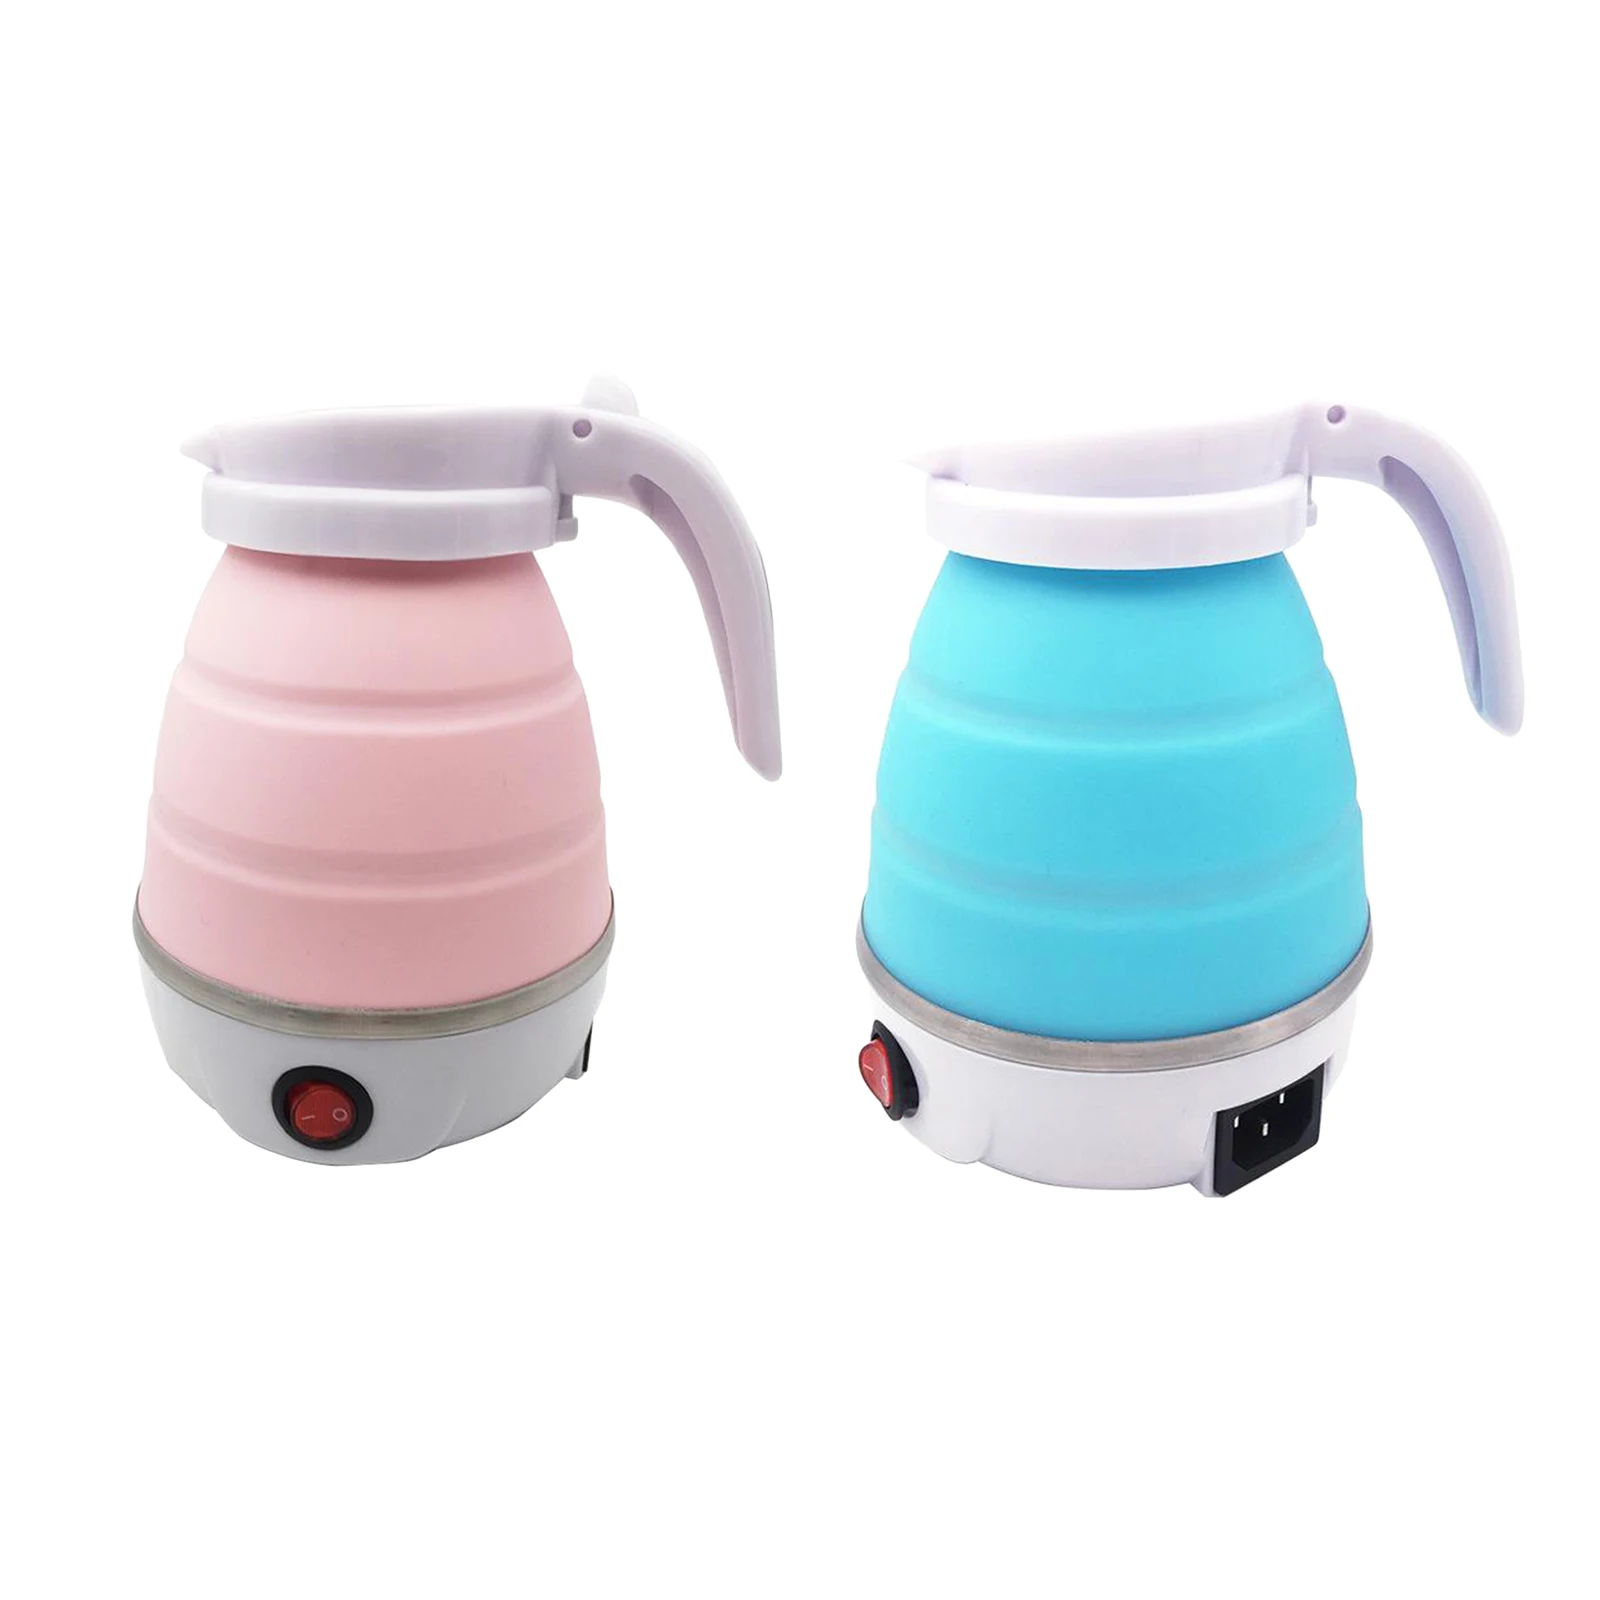 Home Electric Kettle Durable Silicone Foldable Portable Travel Camping Water Boiler Electric Appliances EU Plug